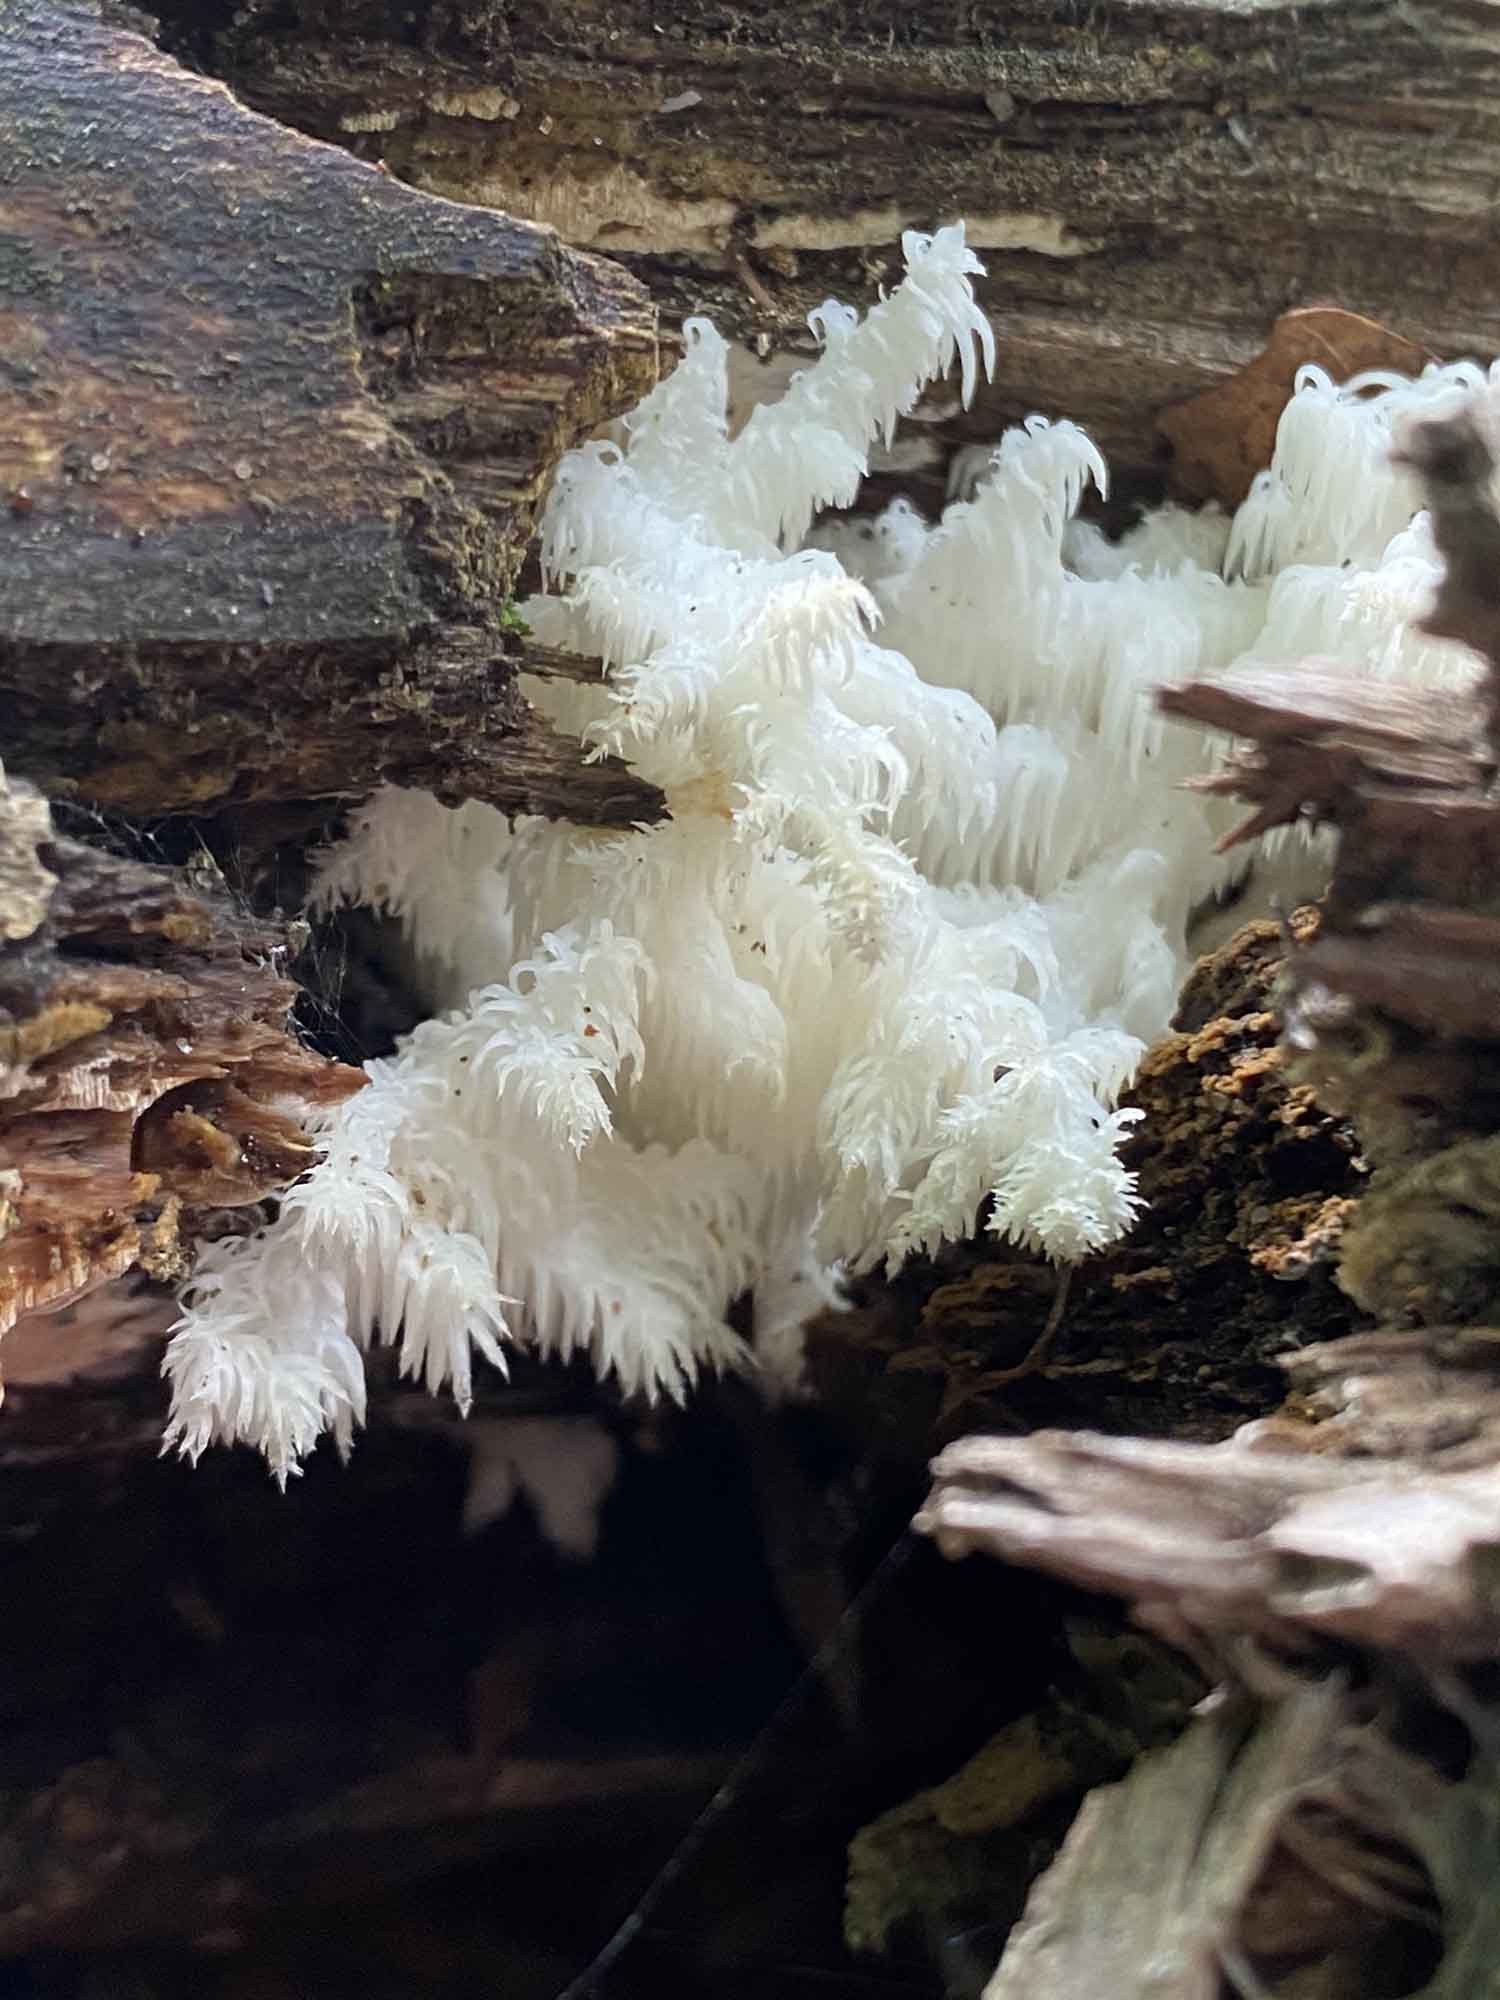 coral tooth fungus